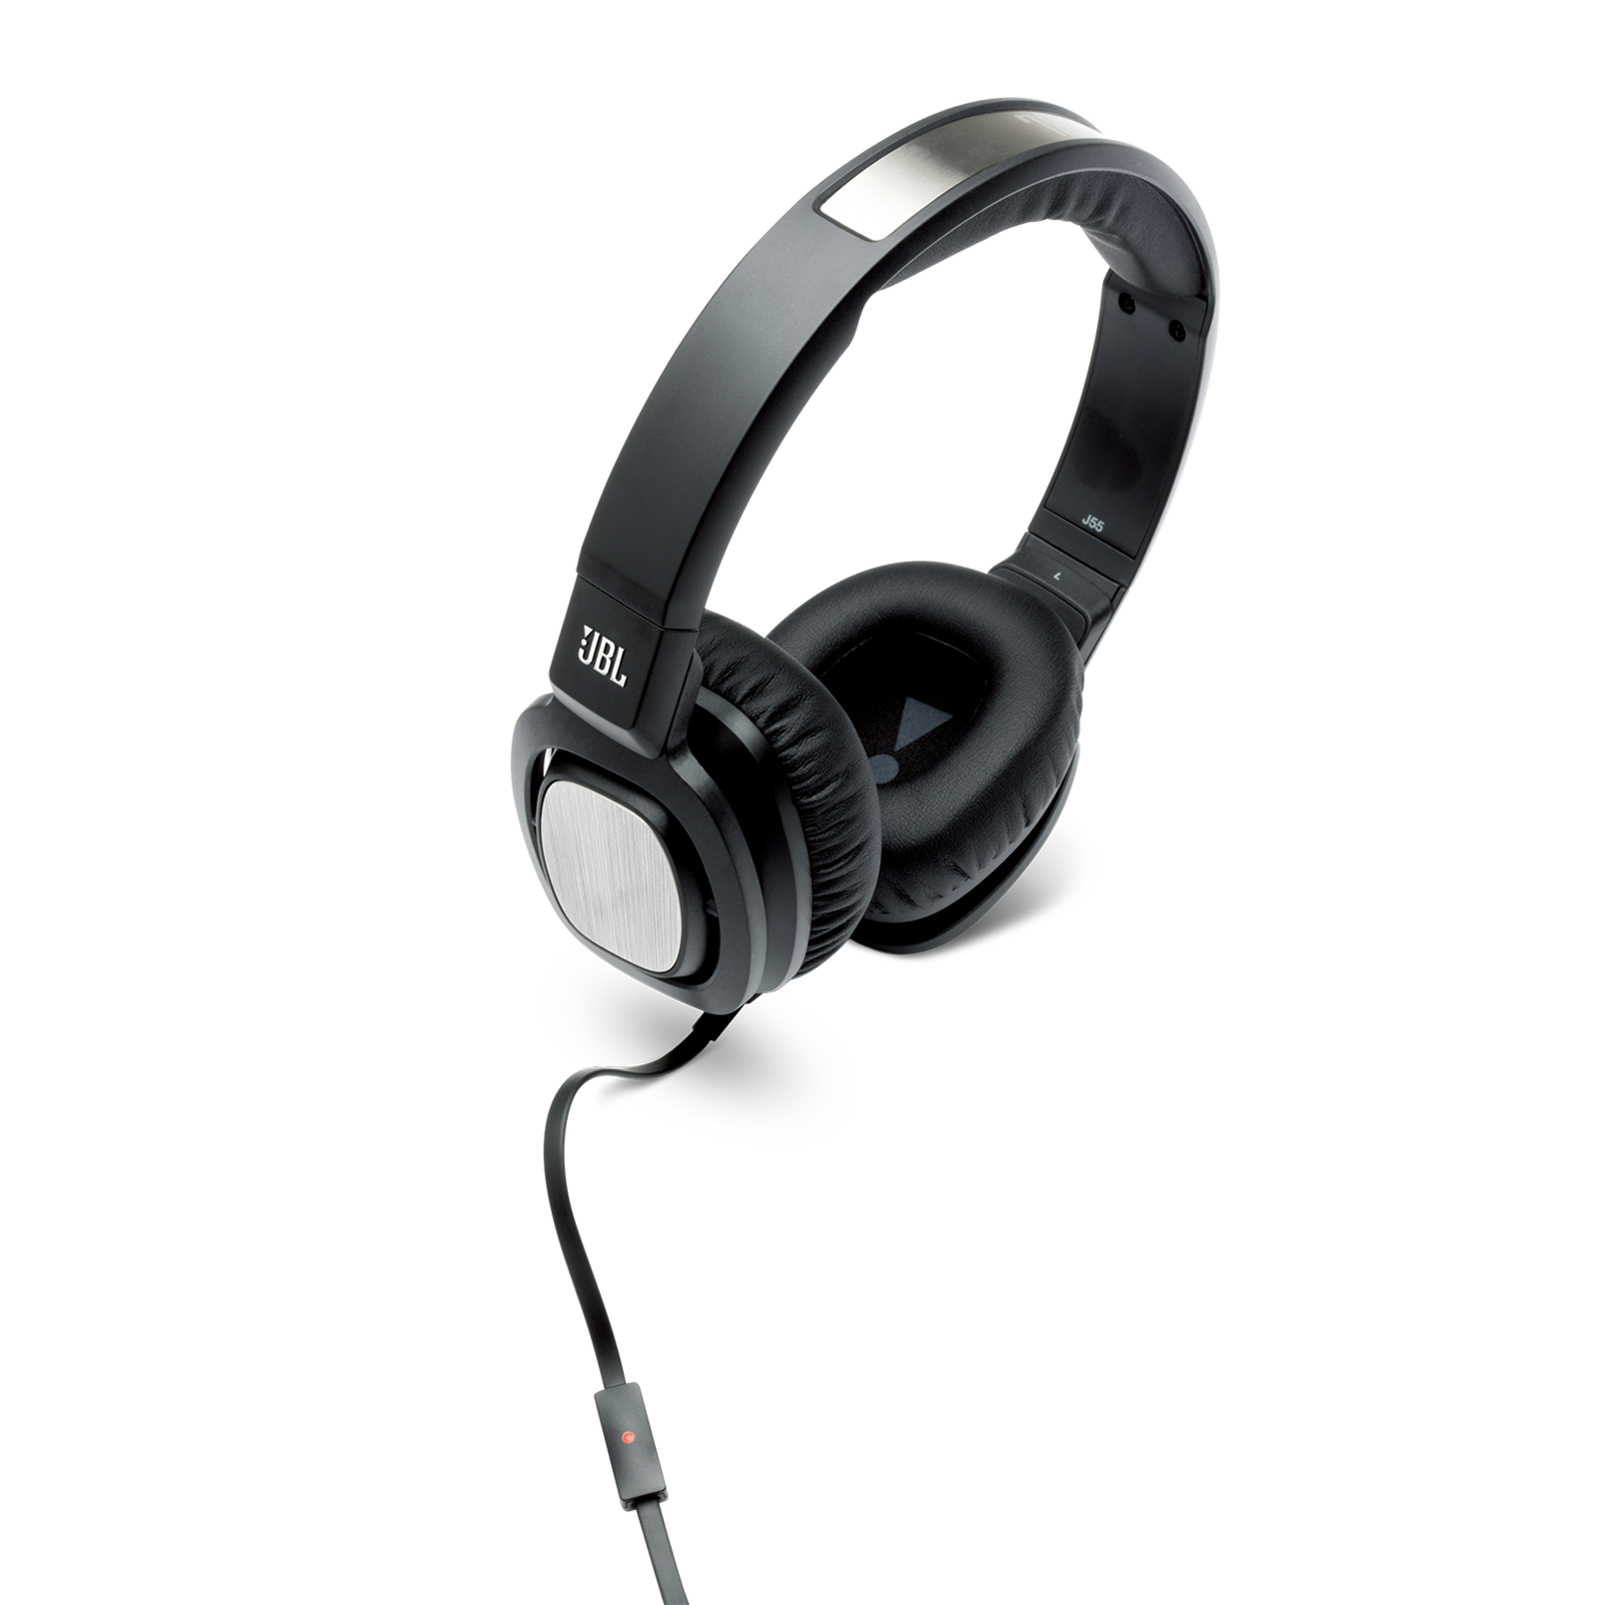 J55a - Black - High-performance On-Ear Headphones for Android Devices - Detailshot 2